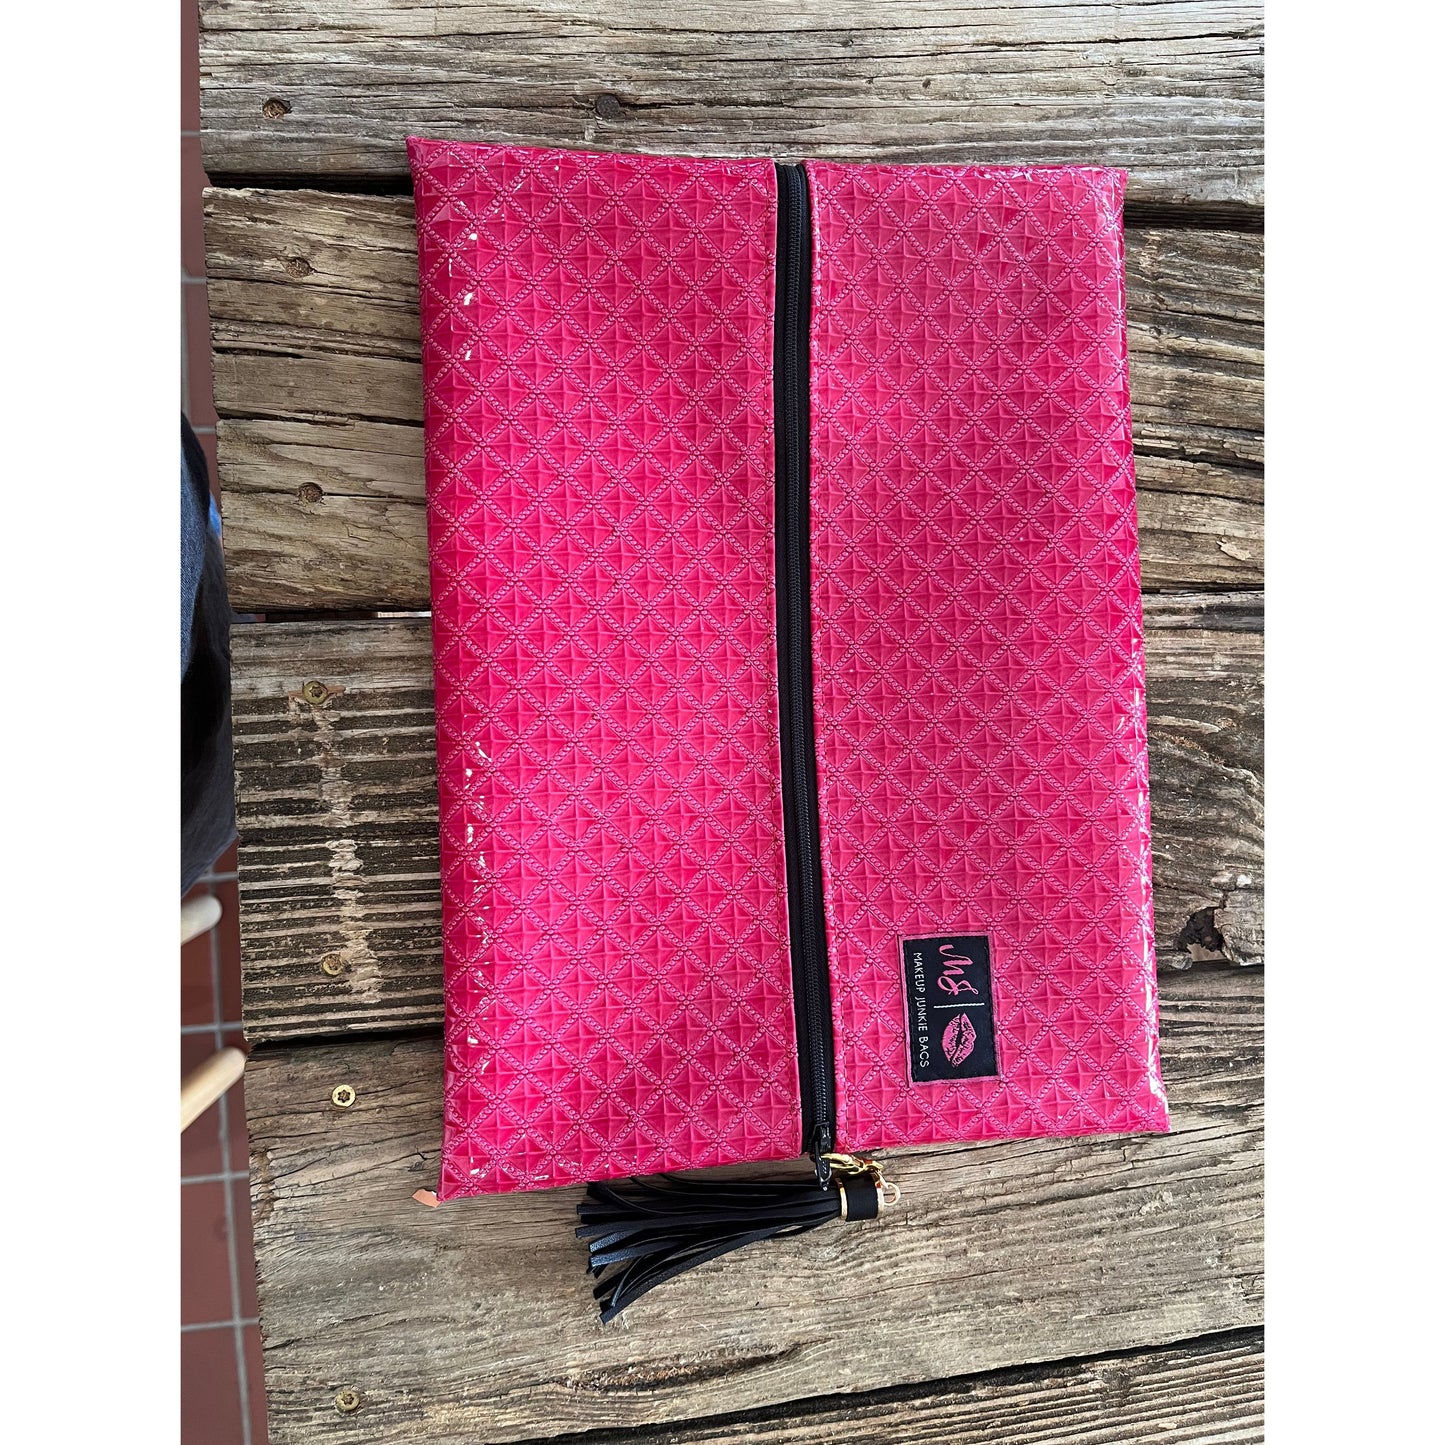 7 1/2 x 11" medium make up bag by Makeup Junkie.  Handmade in Texas, and featured on Shark Tank. Pink Diamond